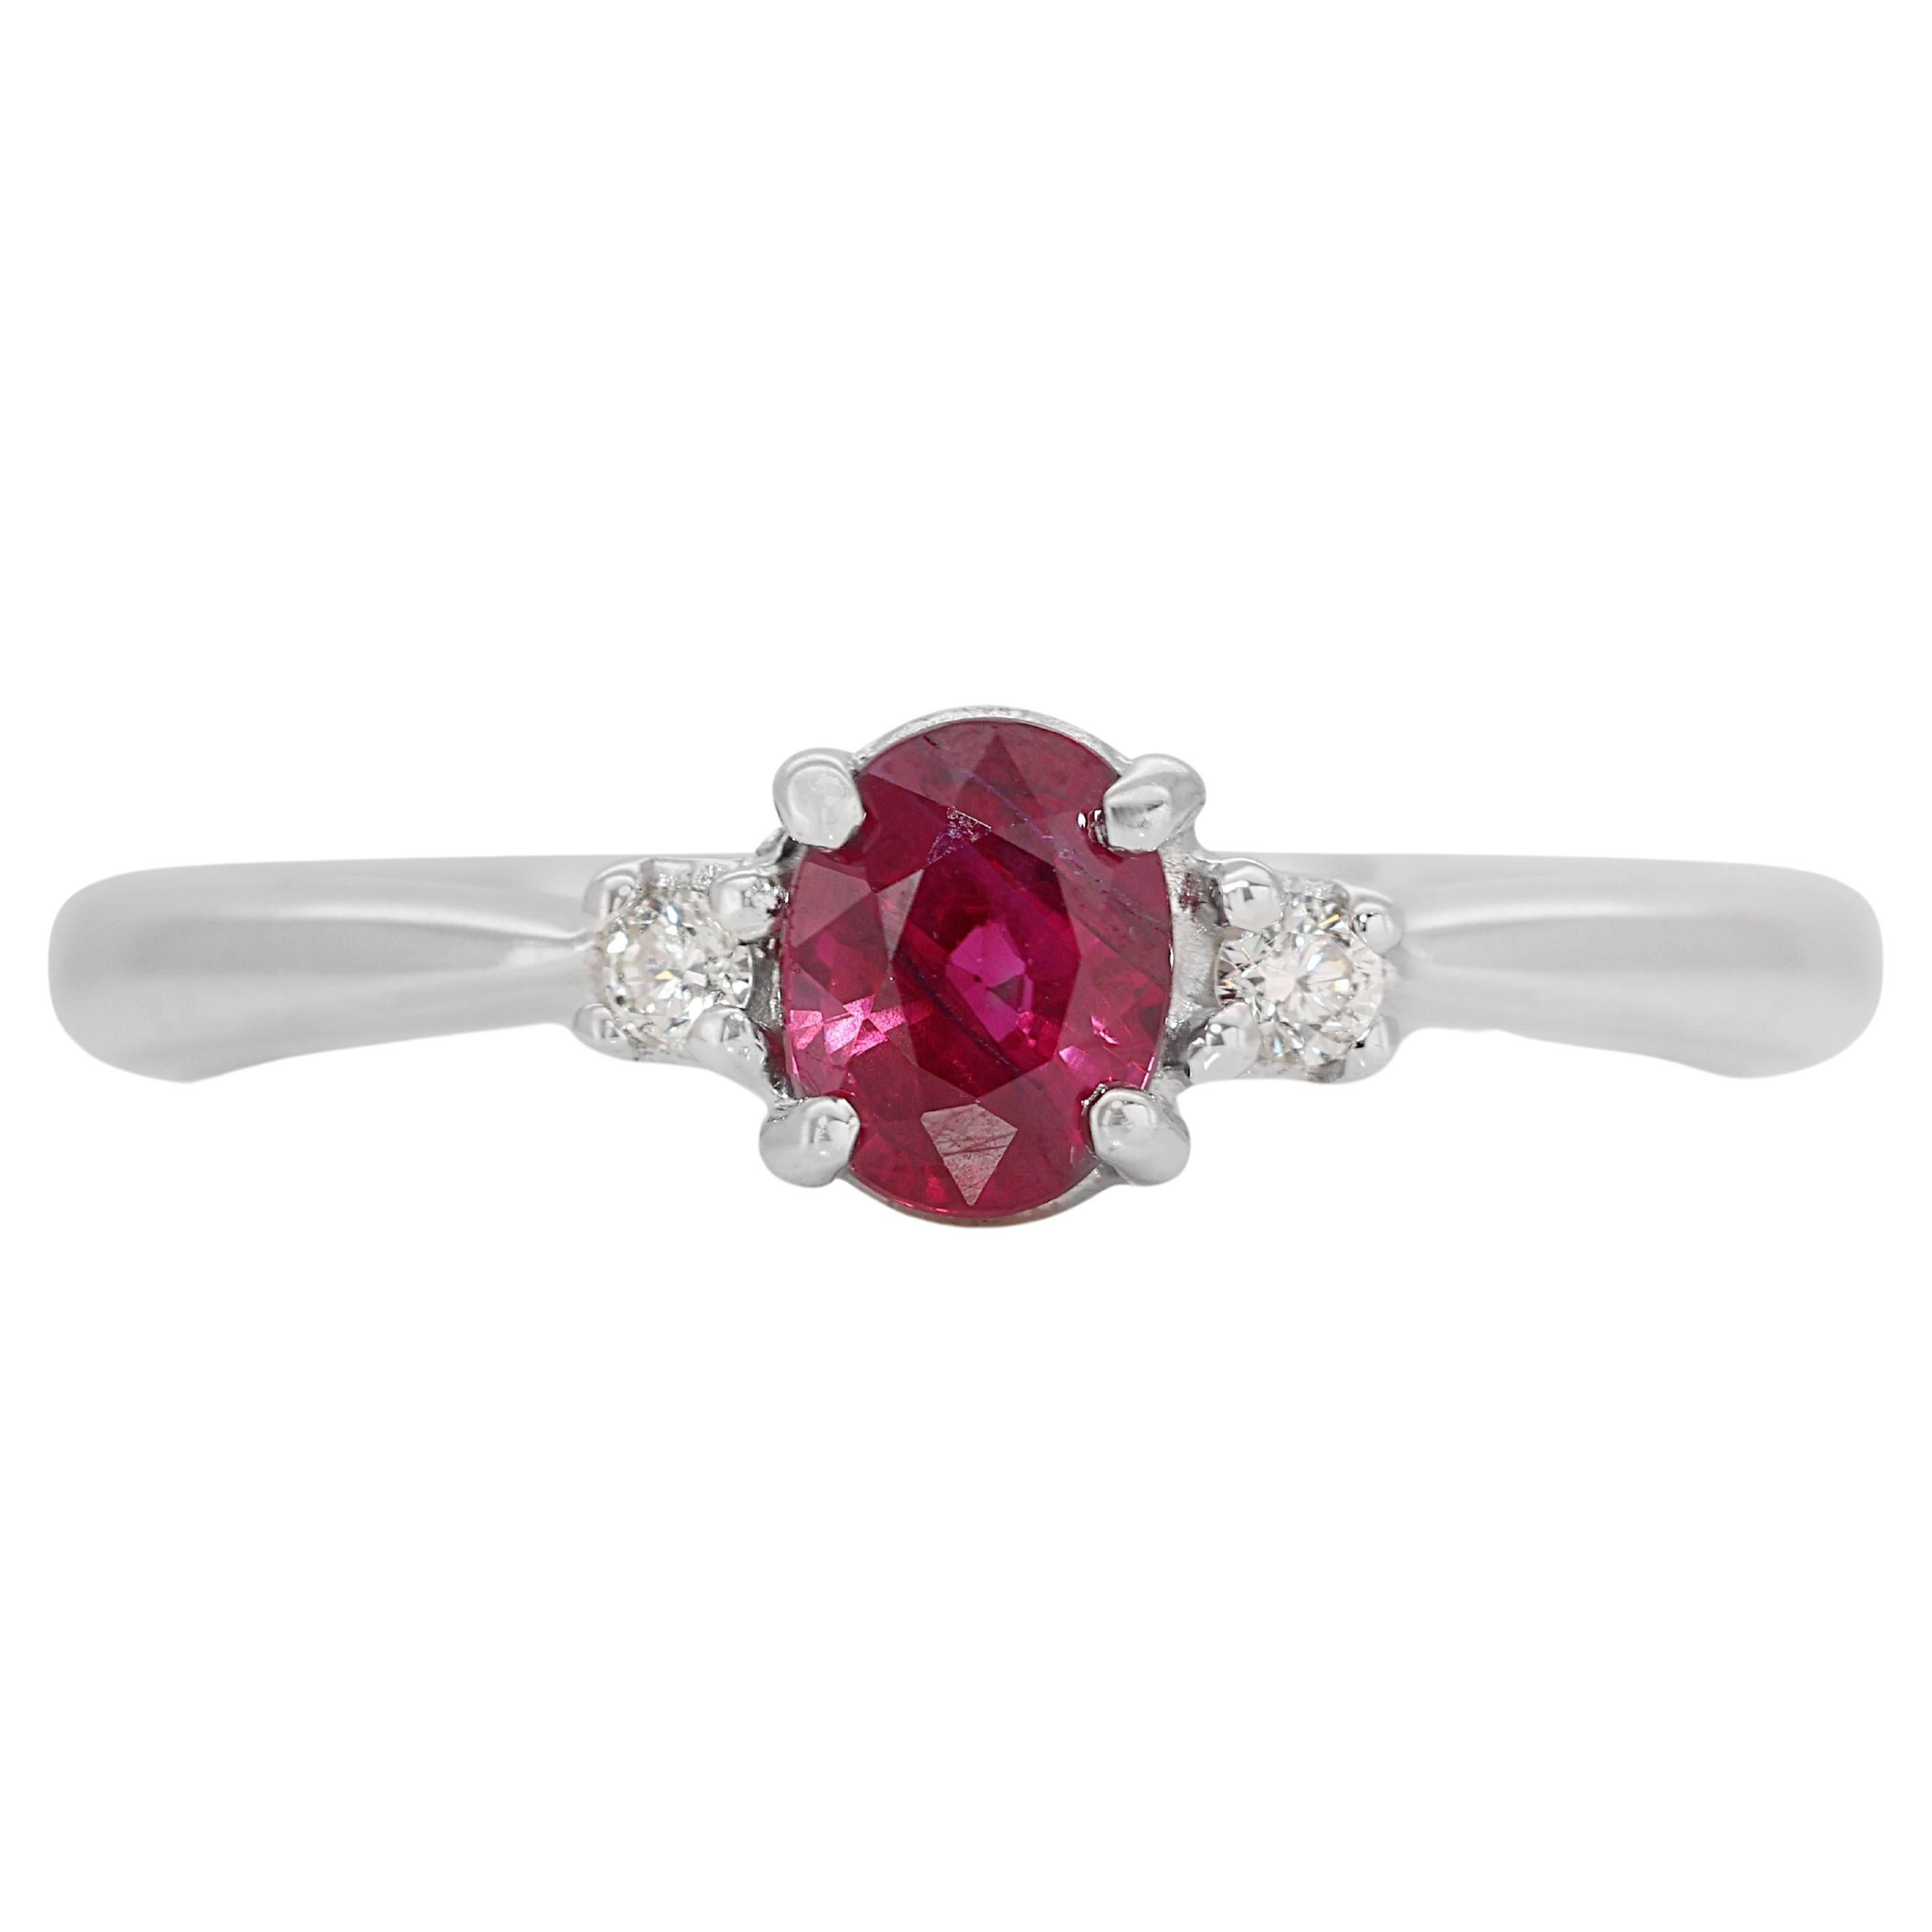 Dazzling 18k White Gold 3 Stone Ring 0.34ct Natural Ruby and Diamonds NGI Cert For Sale